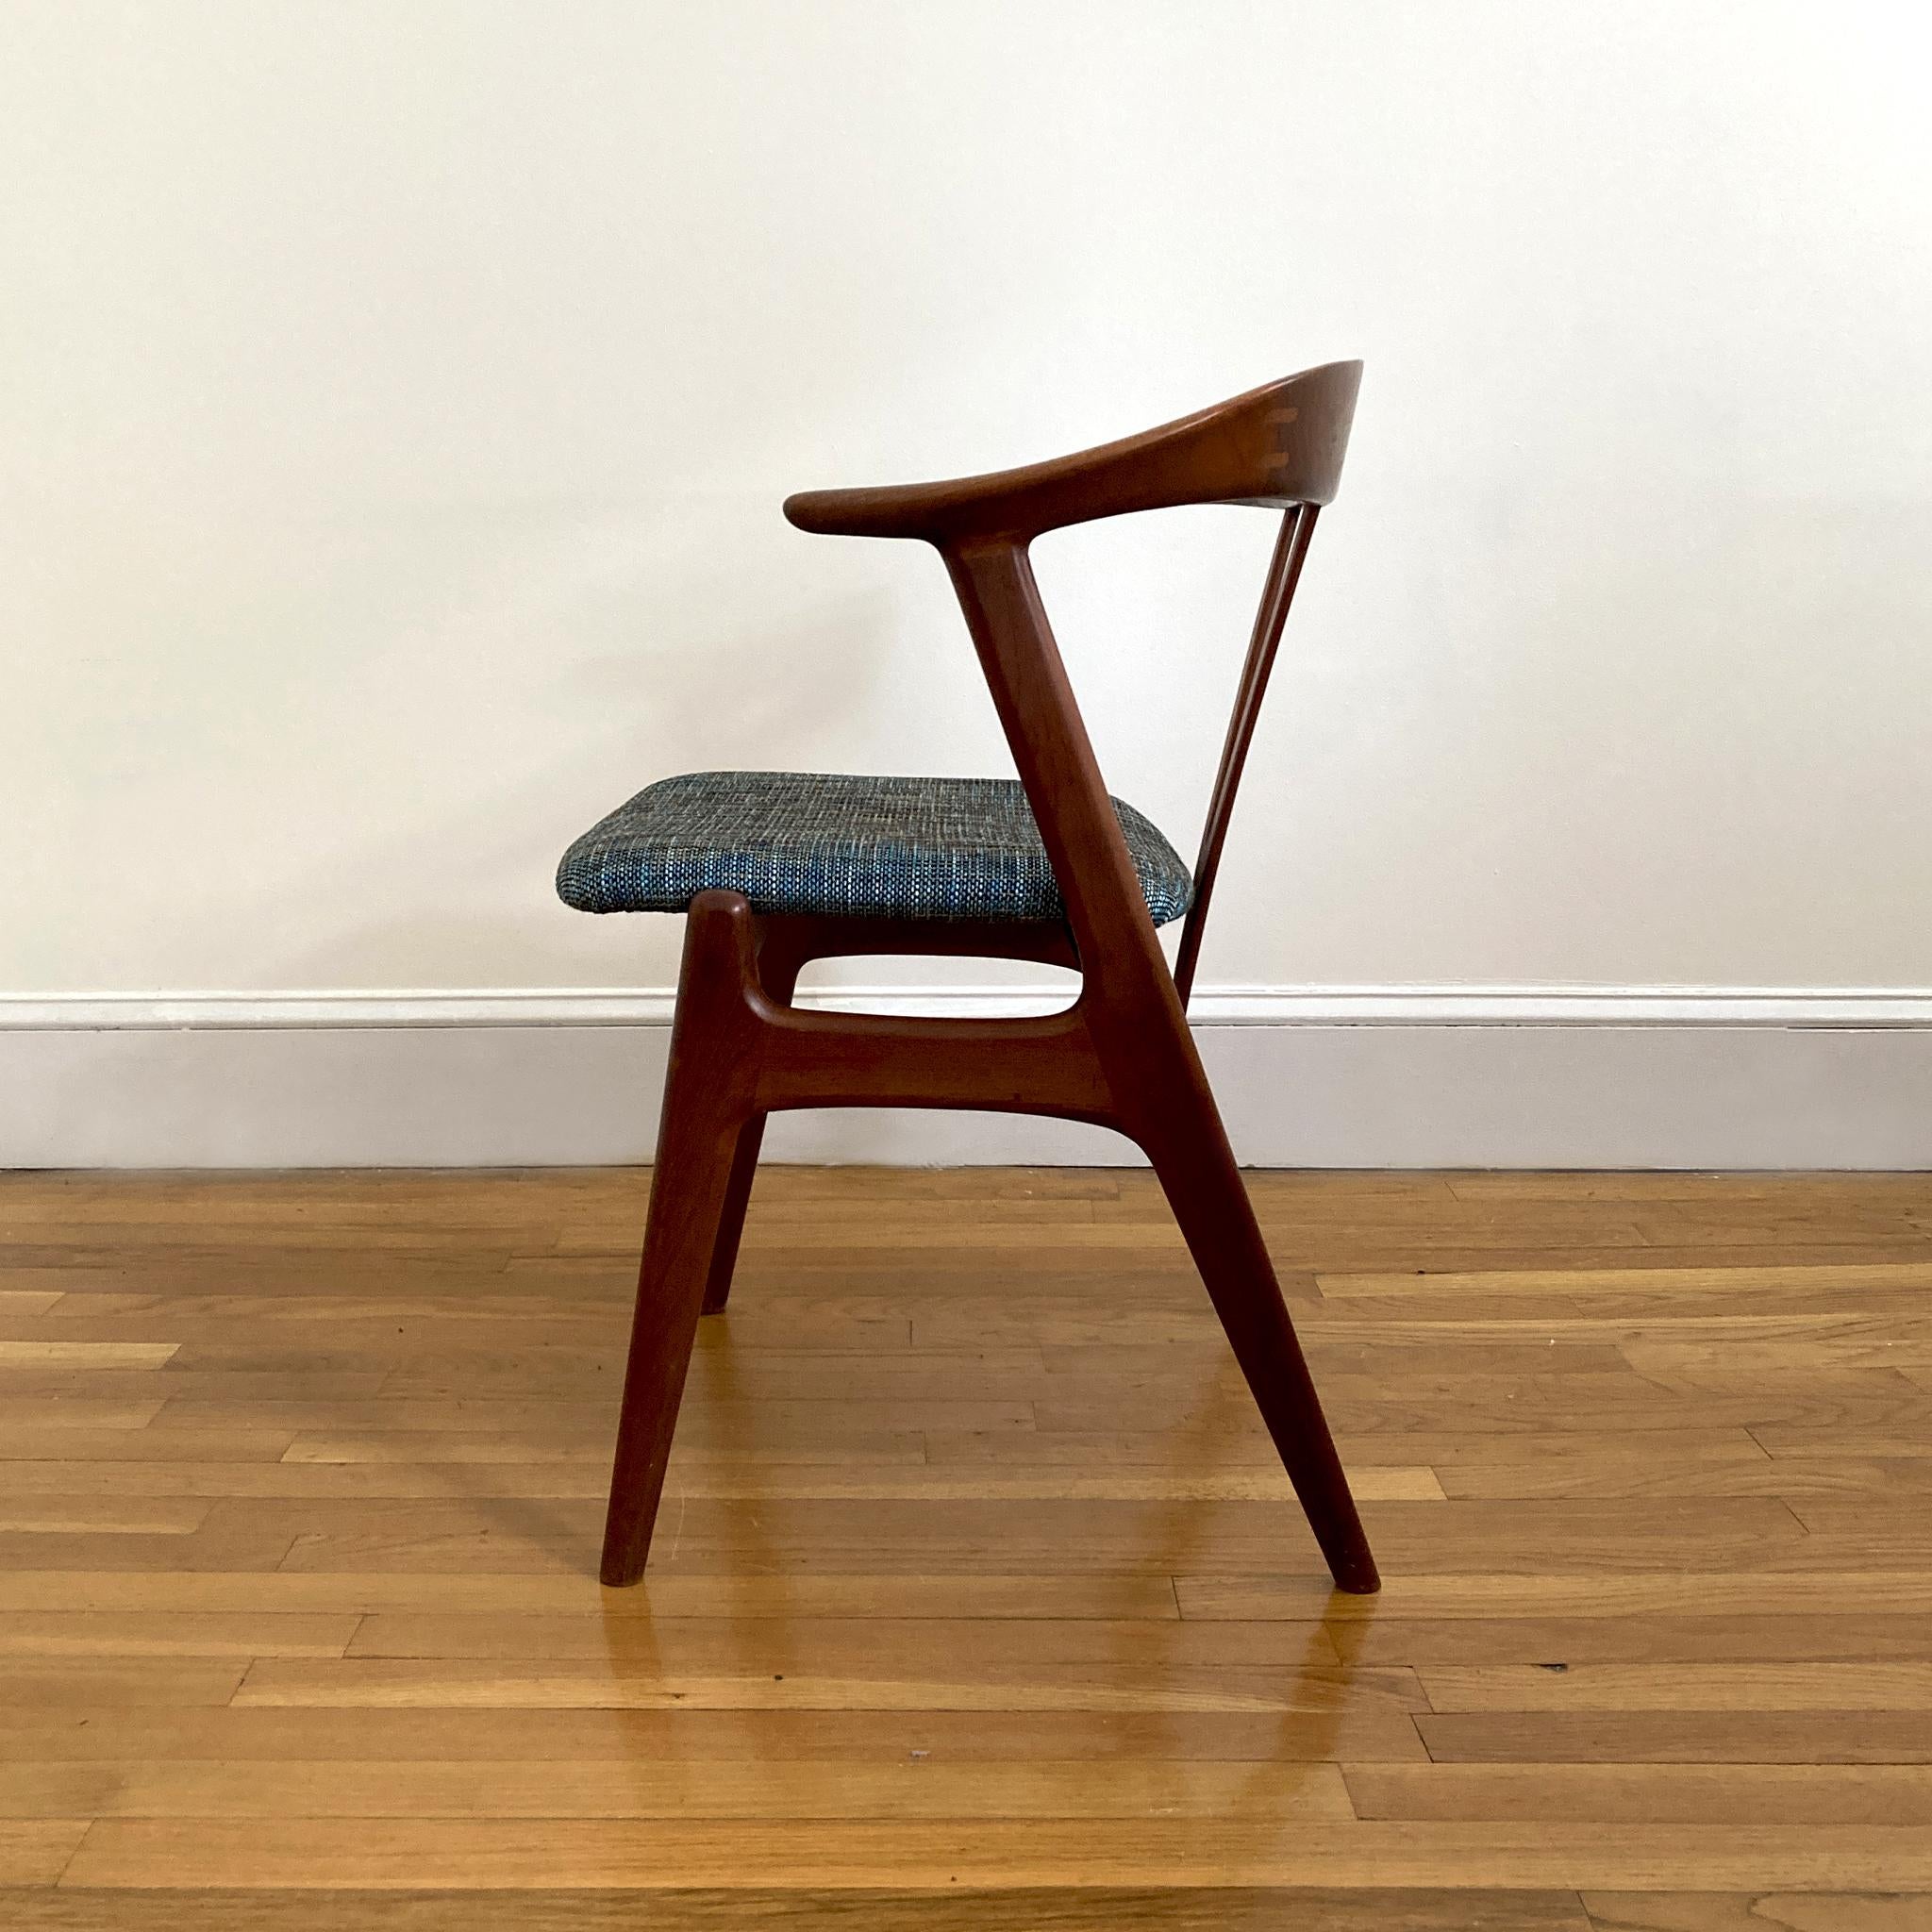 Mid-20th Century Torbjørn Afdal Teak Form Chair with Green Teal Upholstery, 1950s For Sale